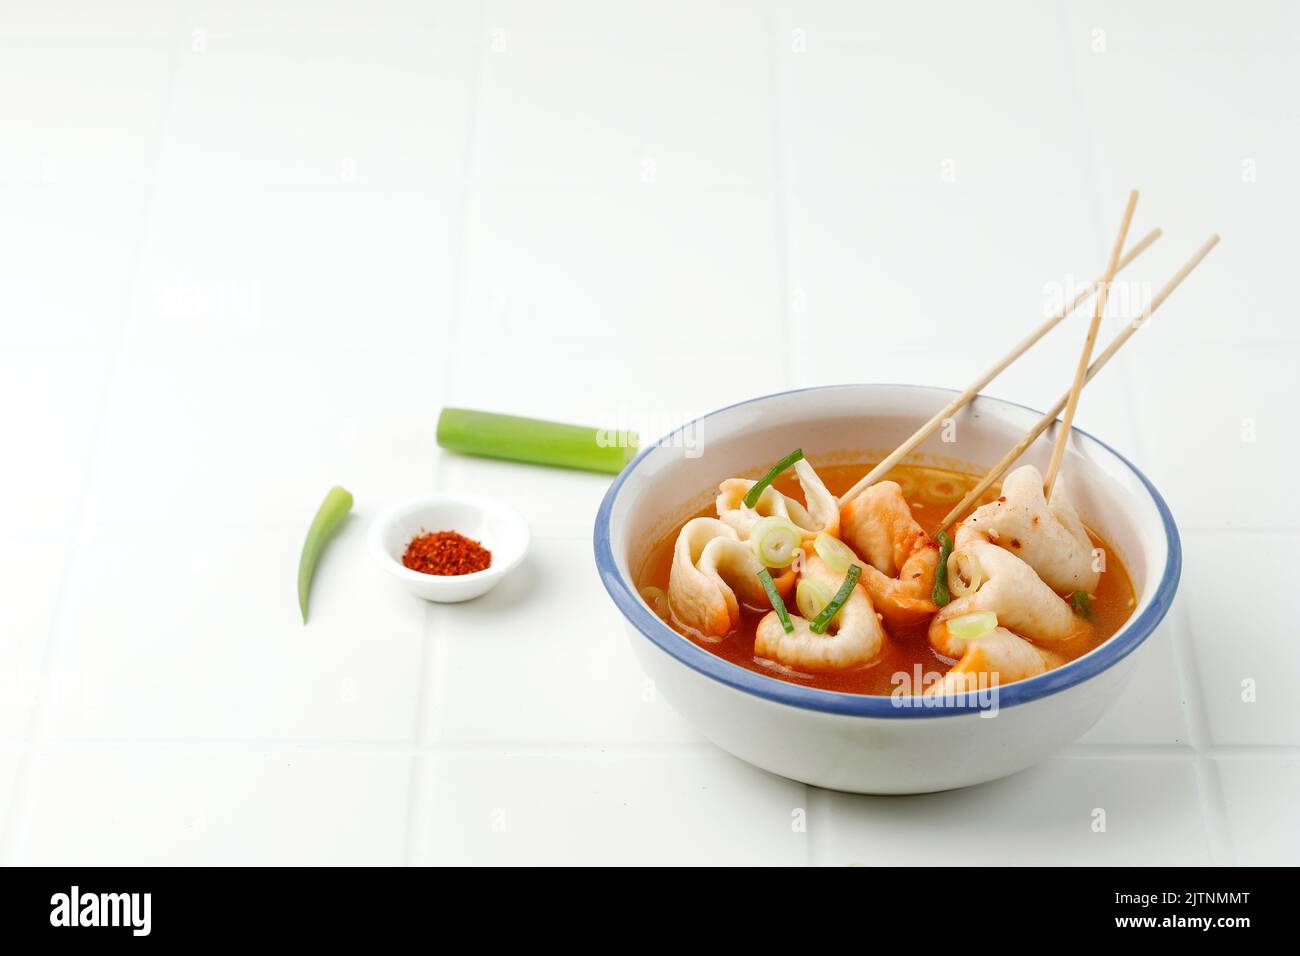 Spicy Eomukguk or Odeng Soup, Korean Popular Street Food Made from Fish Cake Eomuk and Spicy Gochujang Paste. On White Table, COpy SPace for Text Stock Photo